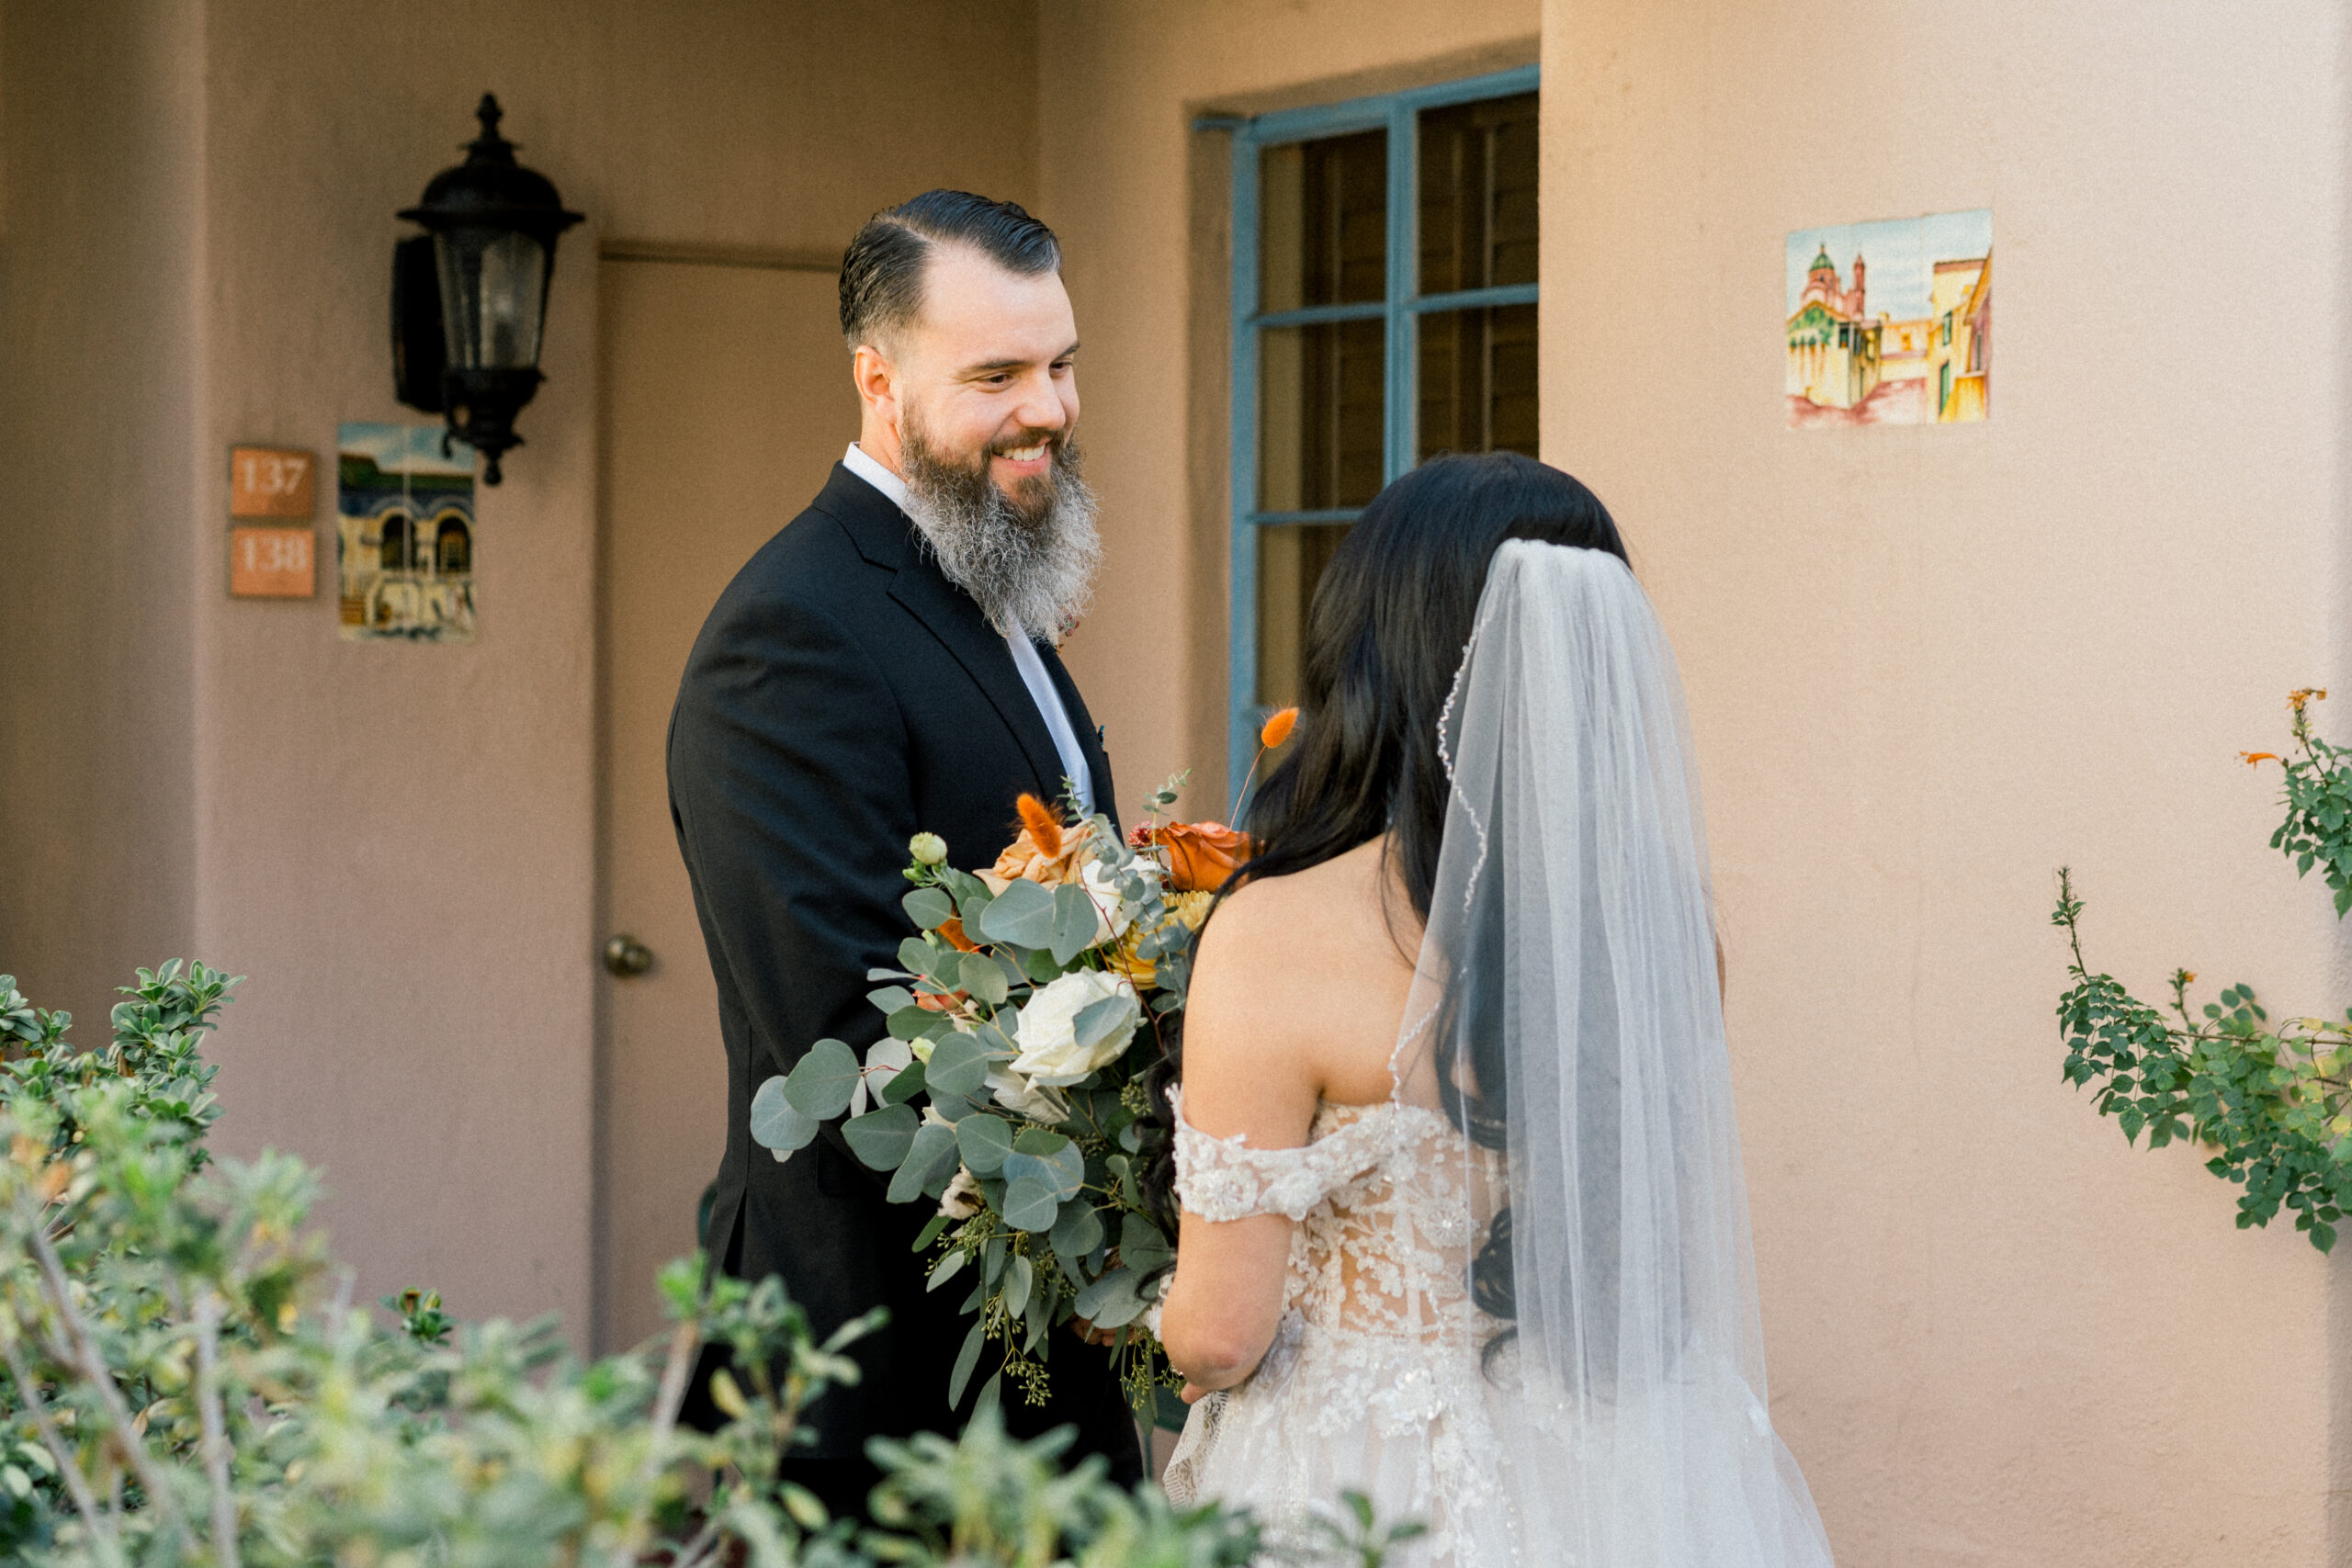 Wedding in Tucson, Az. Bride and groom meet up for a first look before the Ceremony. Ruby Sandoval Photography.